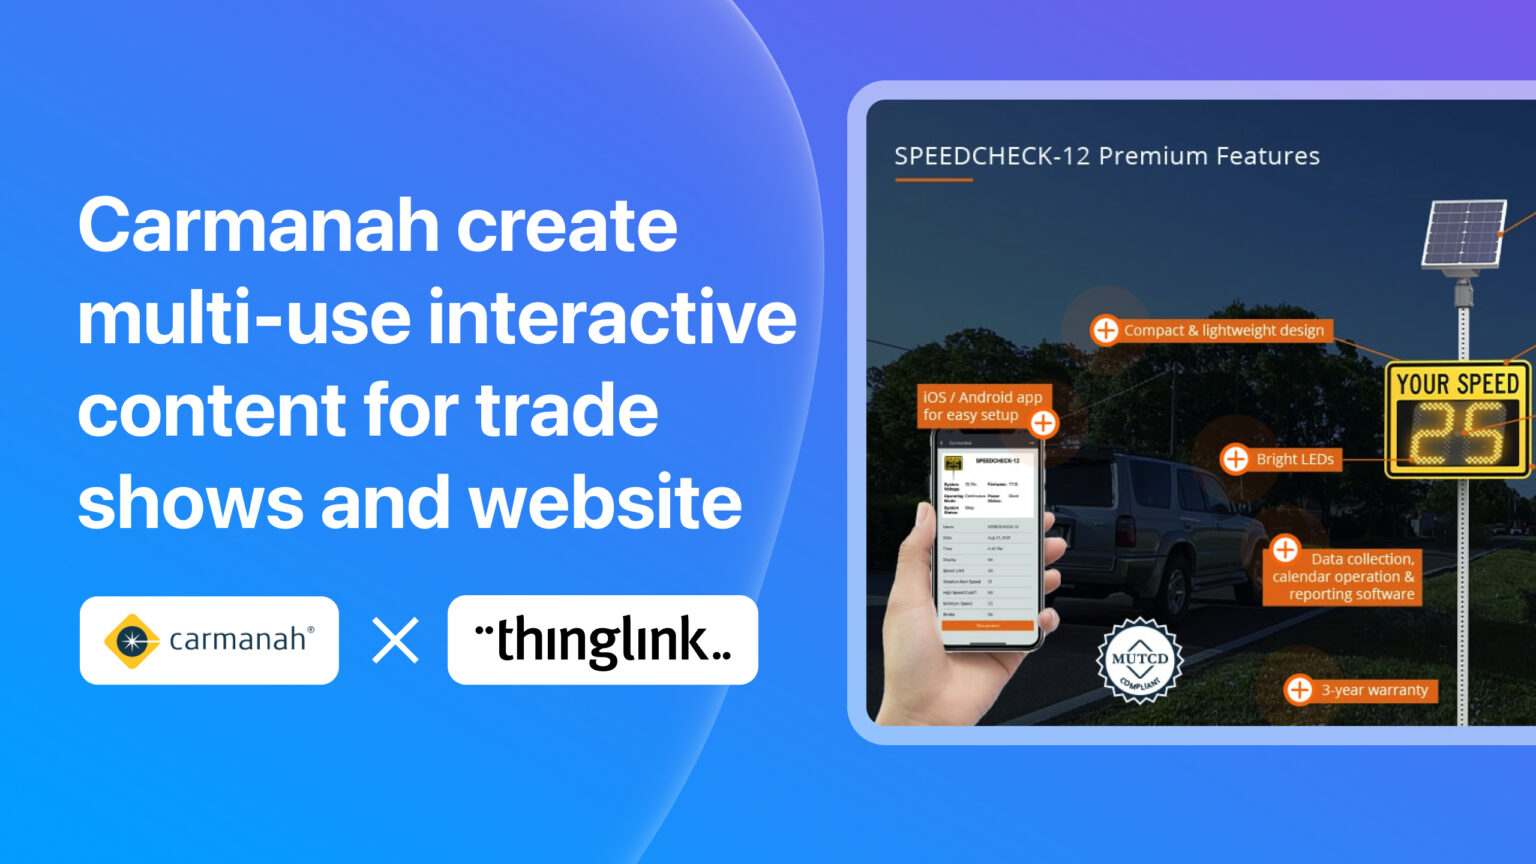 Carmanah create multi-use interactive content for trade shows and website